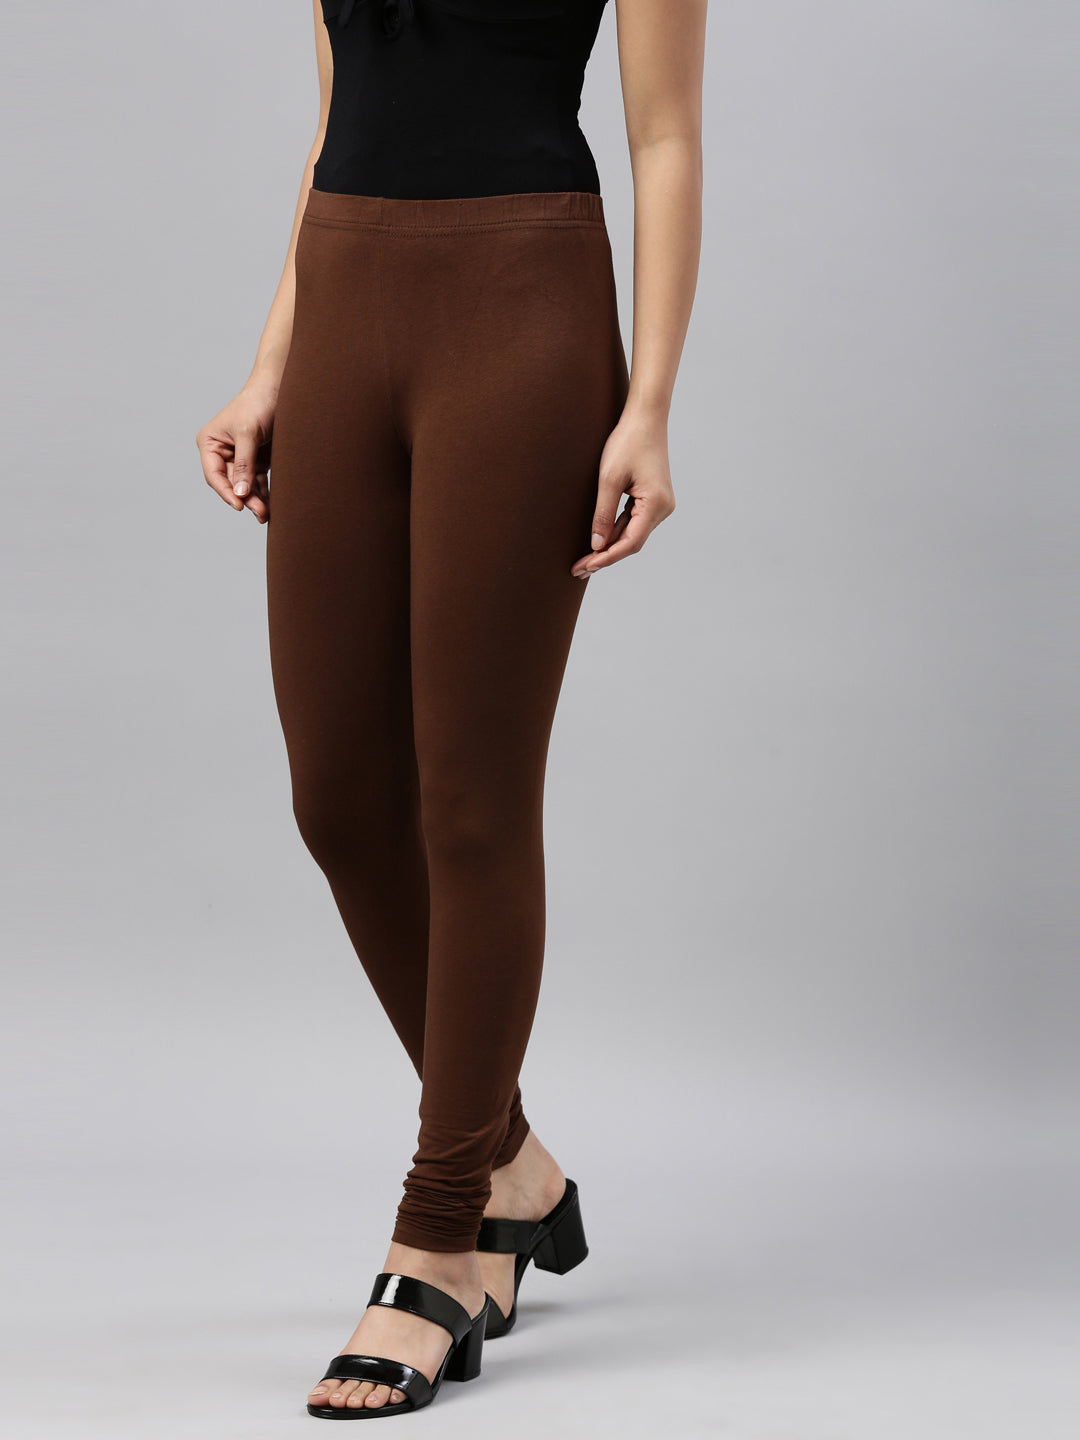 Brown Ankle Fit Leggings for Women – Fitflex